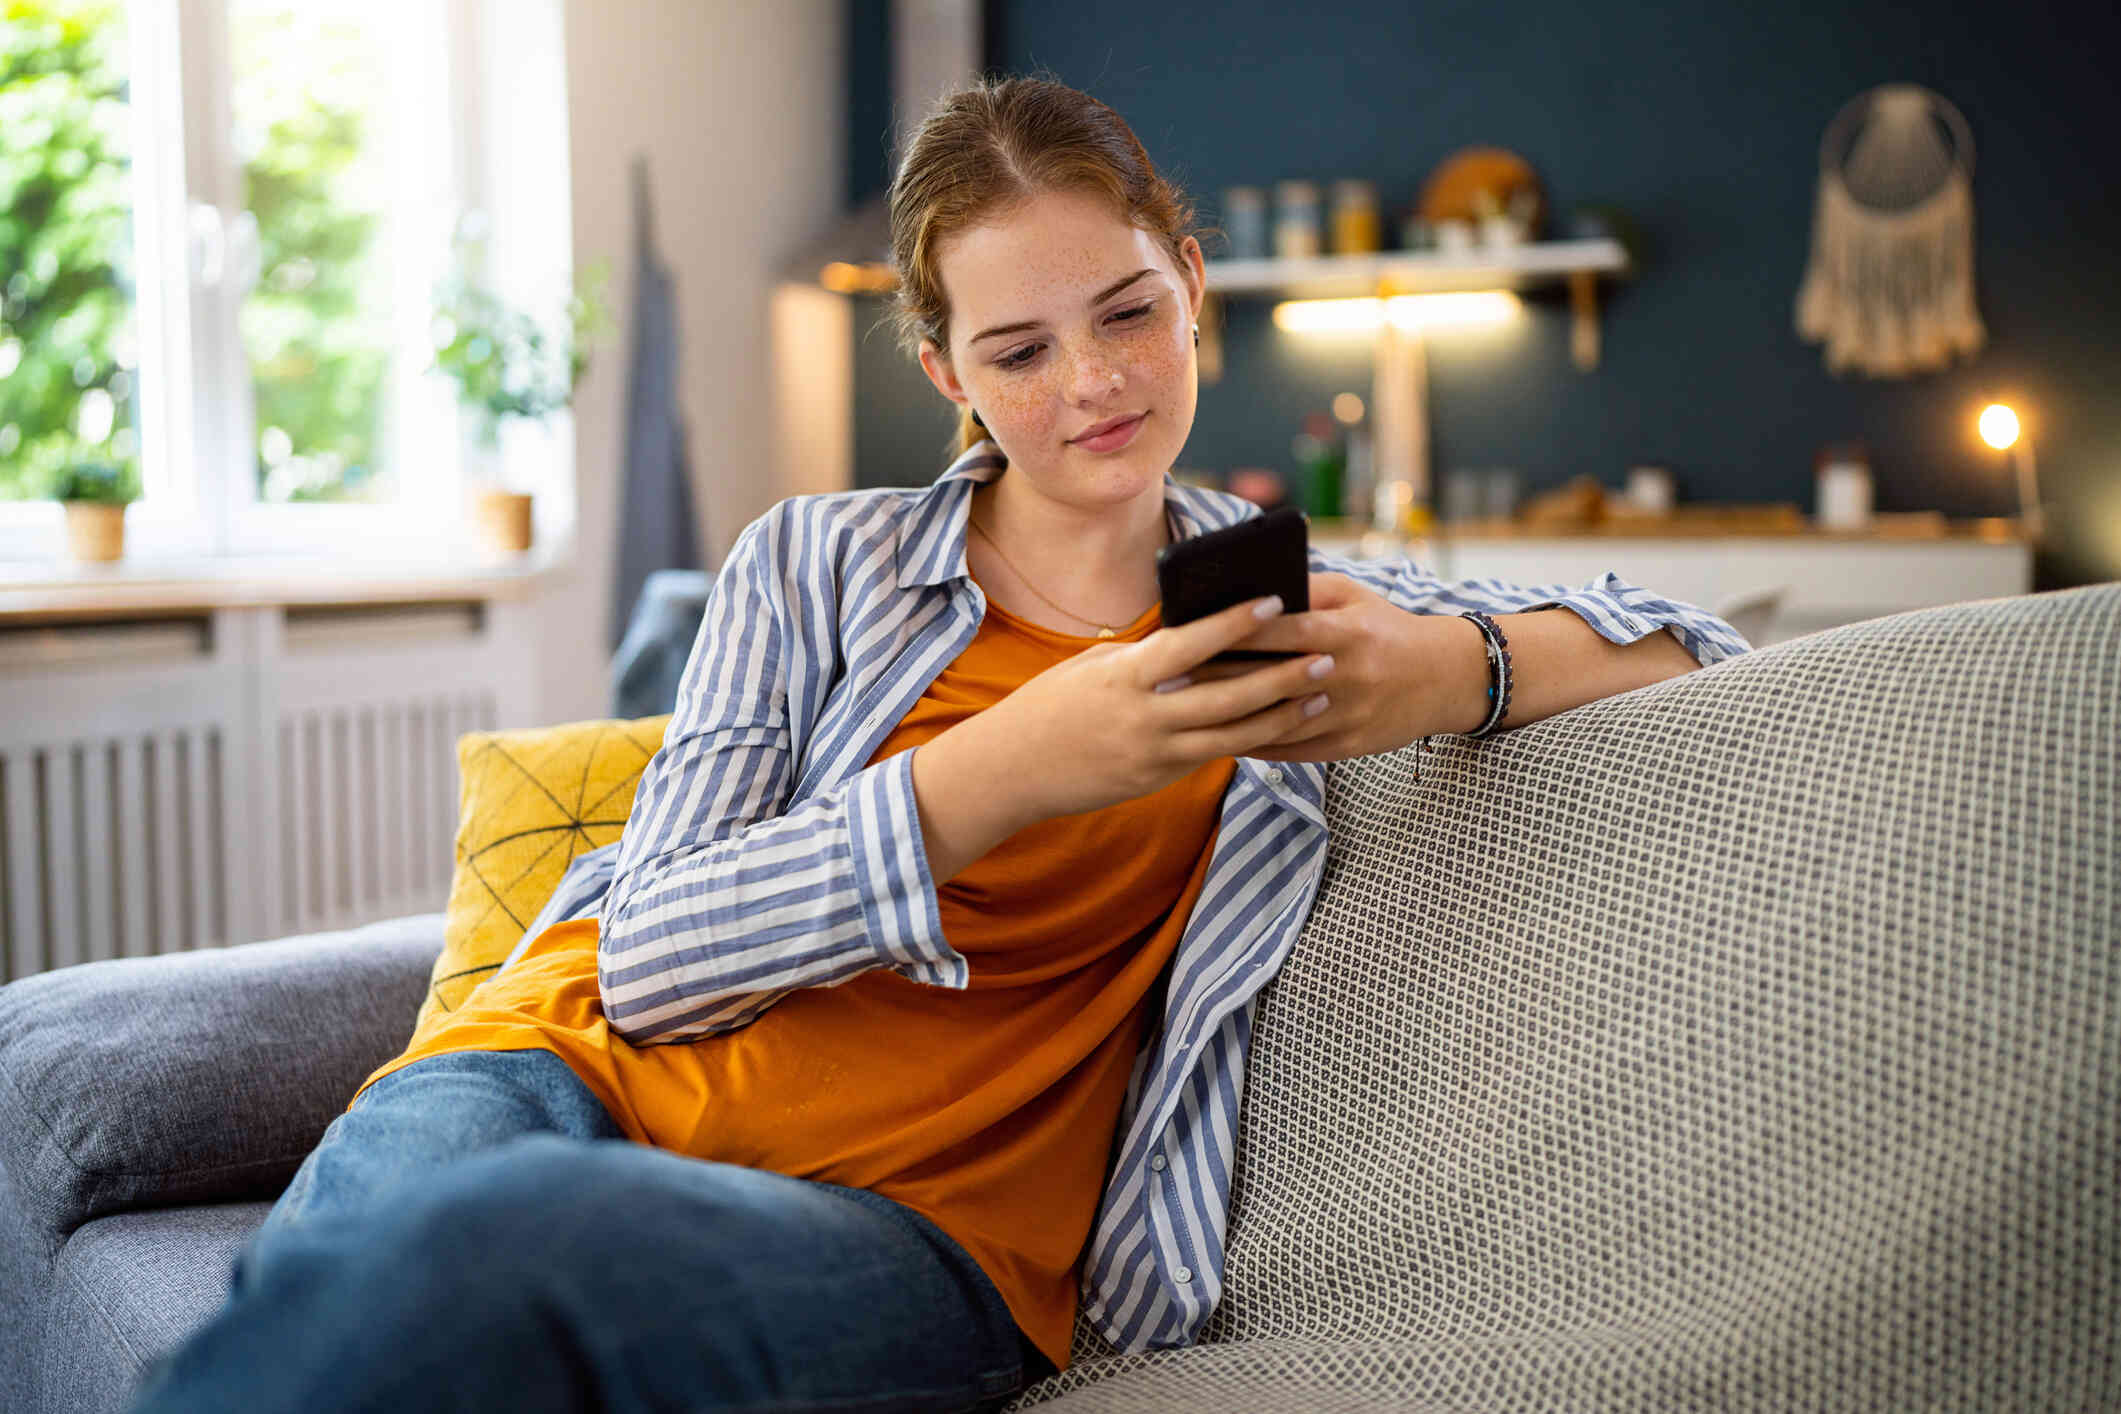 A teen girl in an orange shirt sits casually on the couch in the living room and looks at the cellphone in her hand.